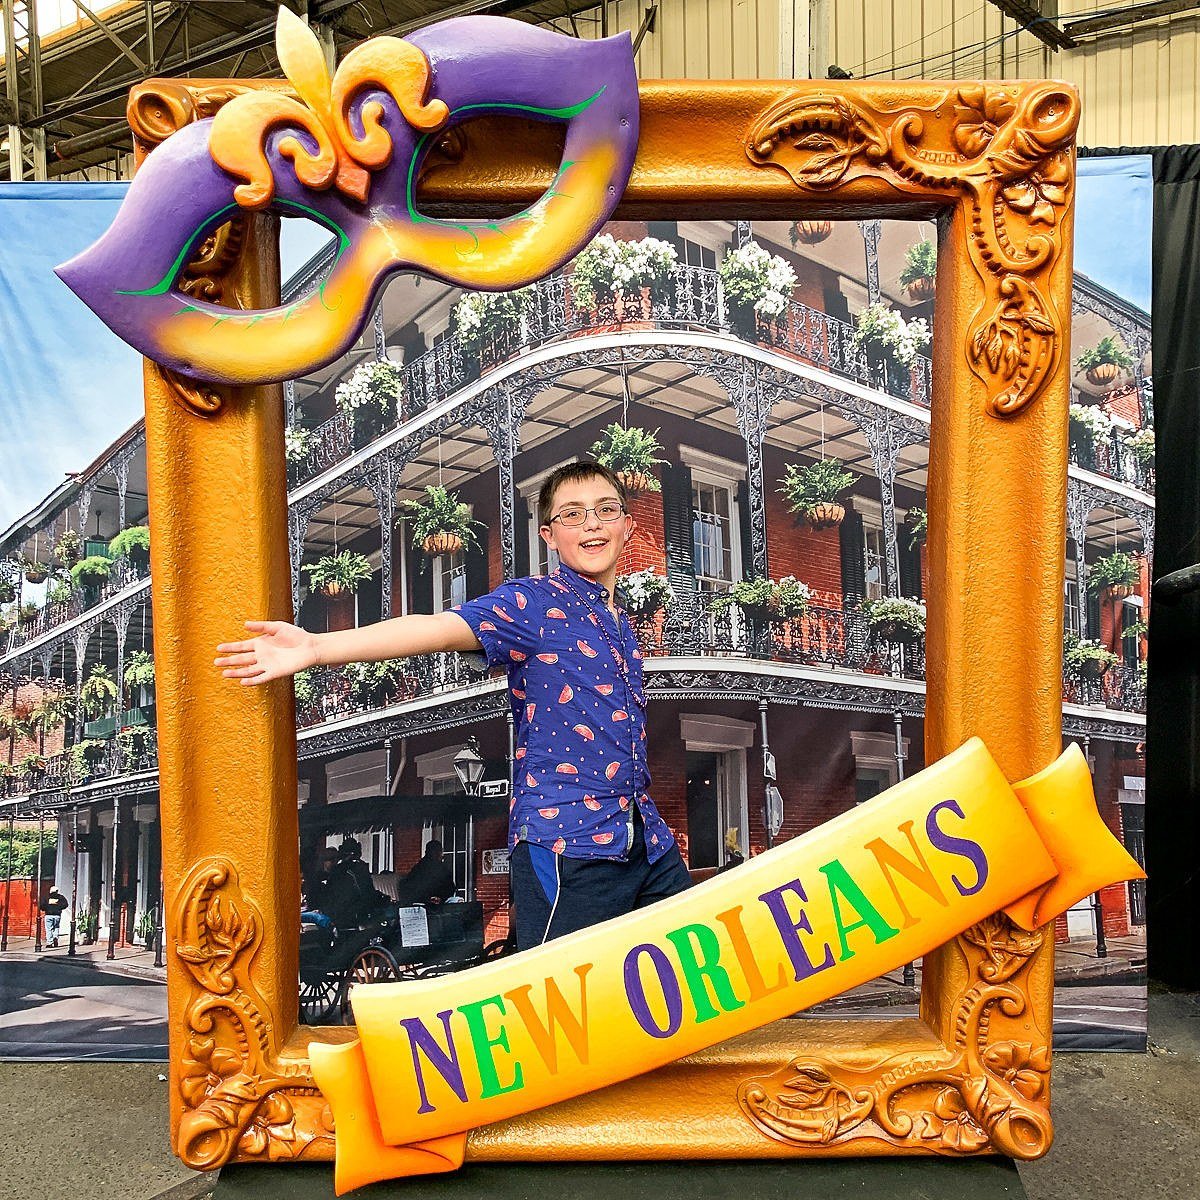 20 Best KID-FRIENDLY Things to Do in New Orleans